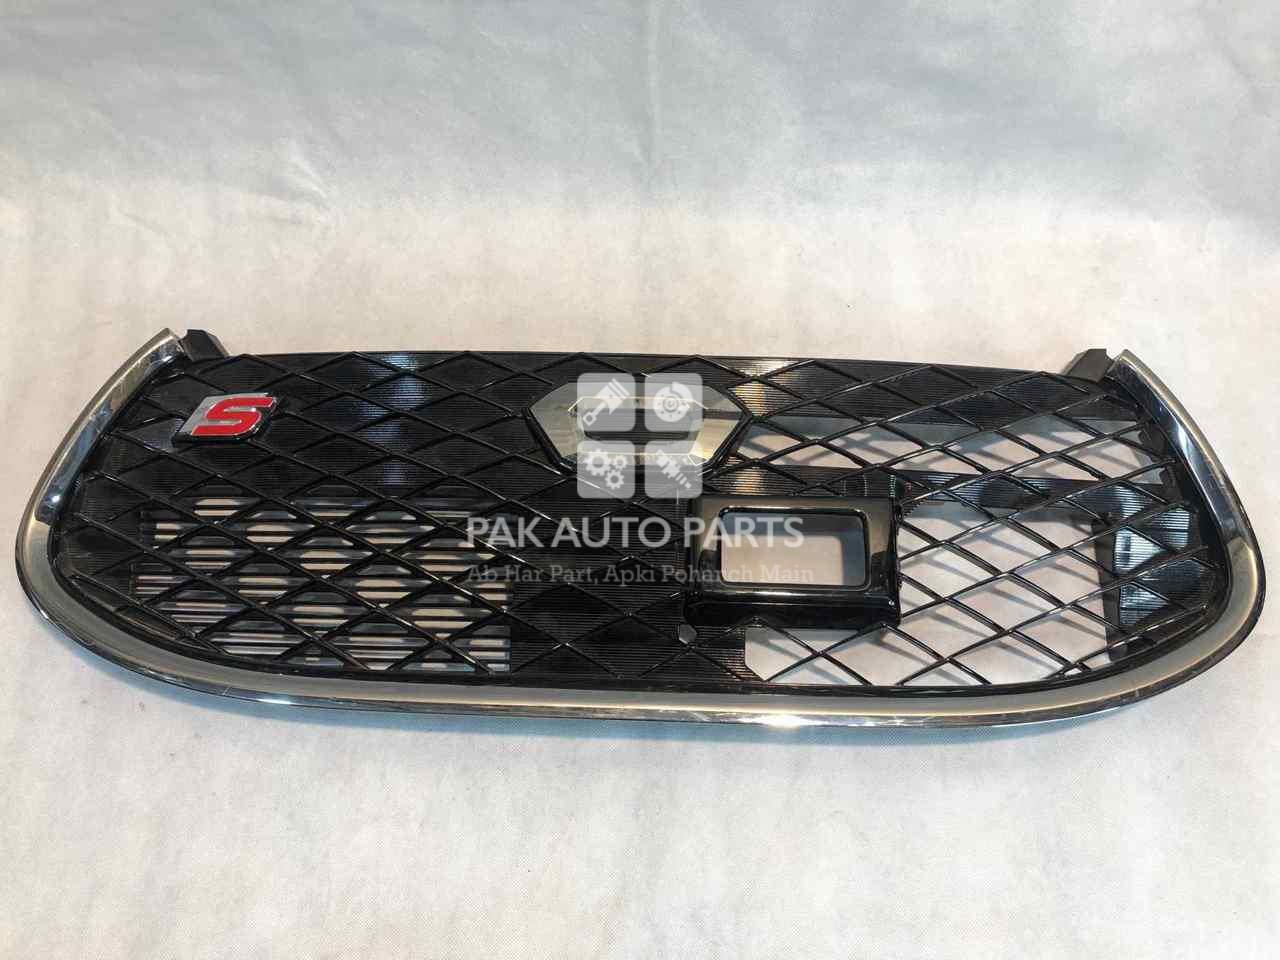 Picture of Daihatsu Cast Activa 2014-15 Front Grill